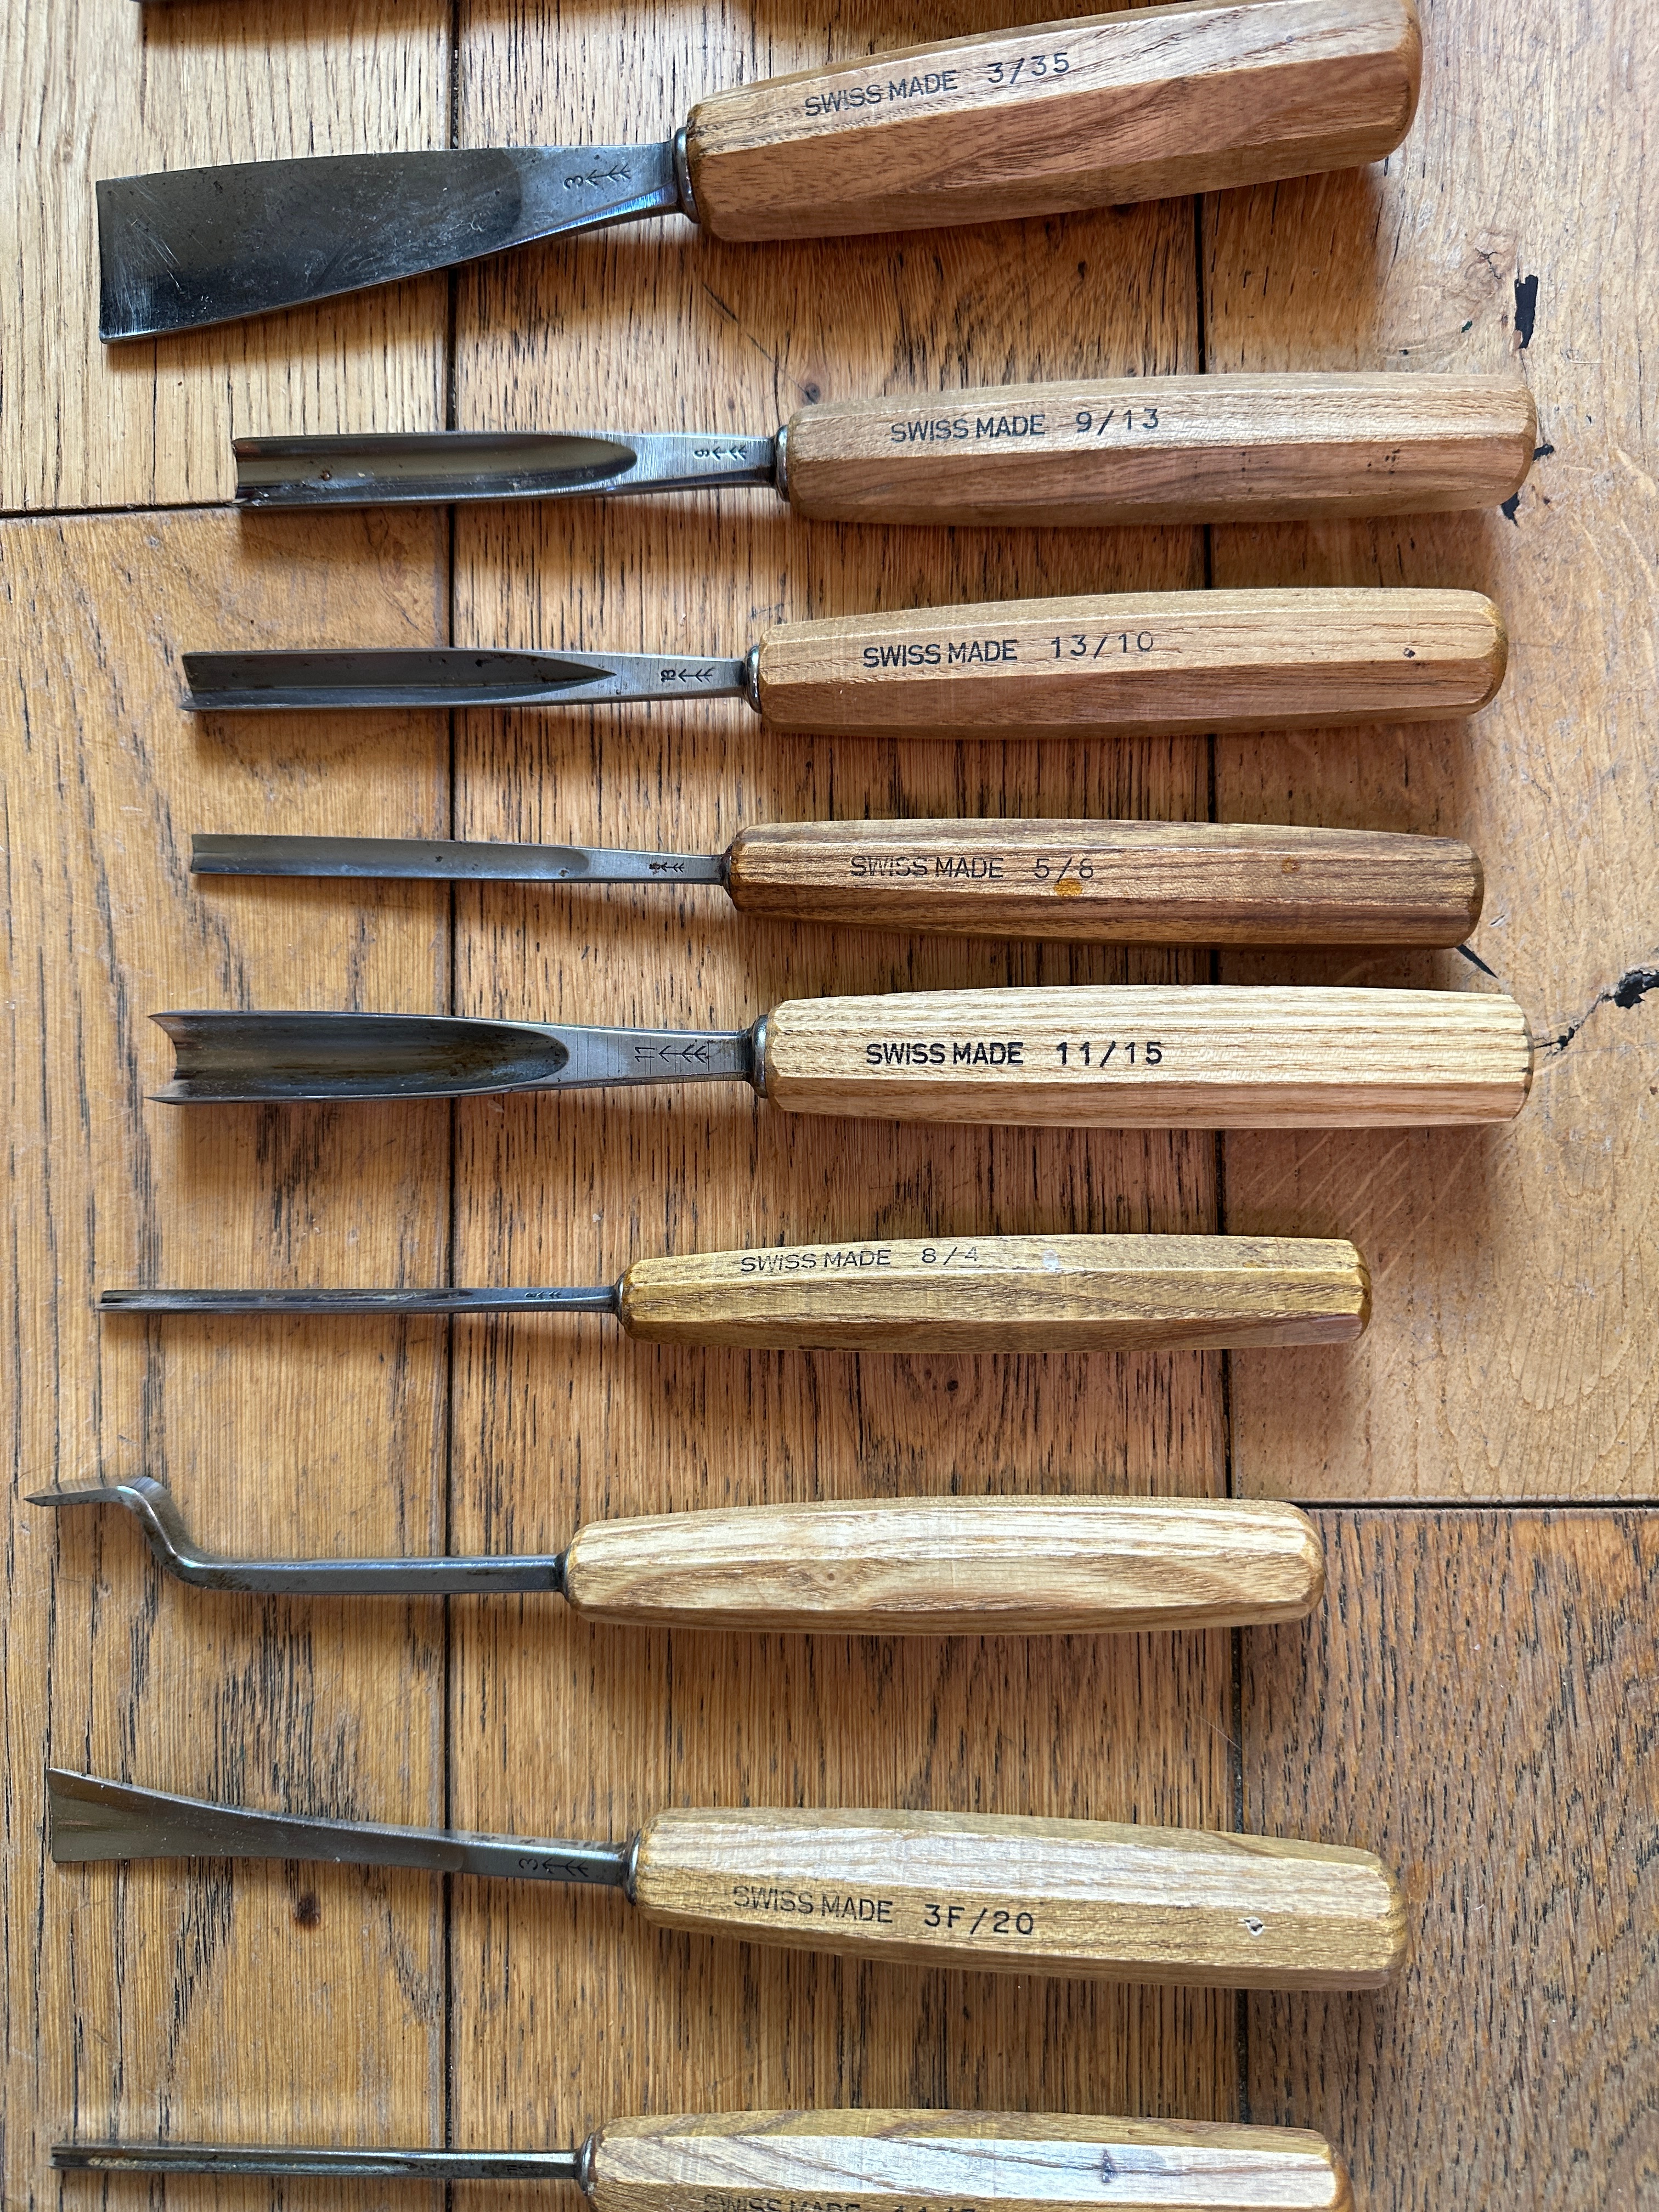 Lot of 27 Swiss Made Woodworking Chisels. - Image 11 of 12